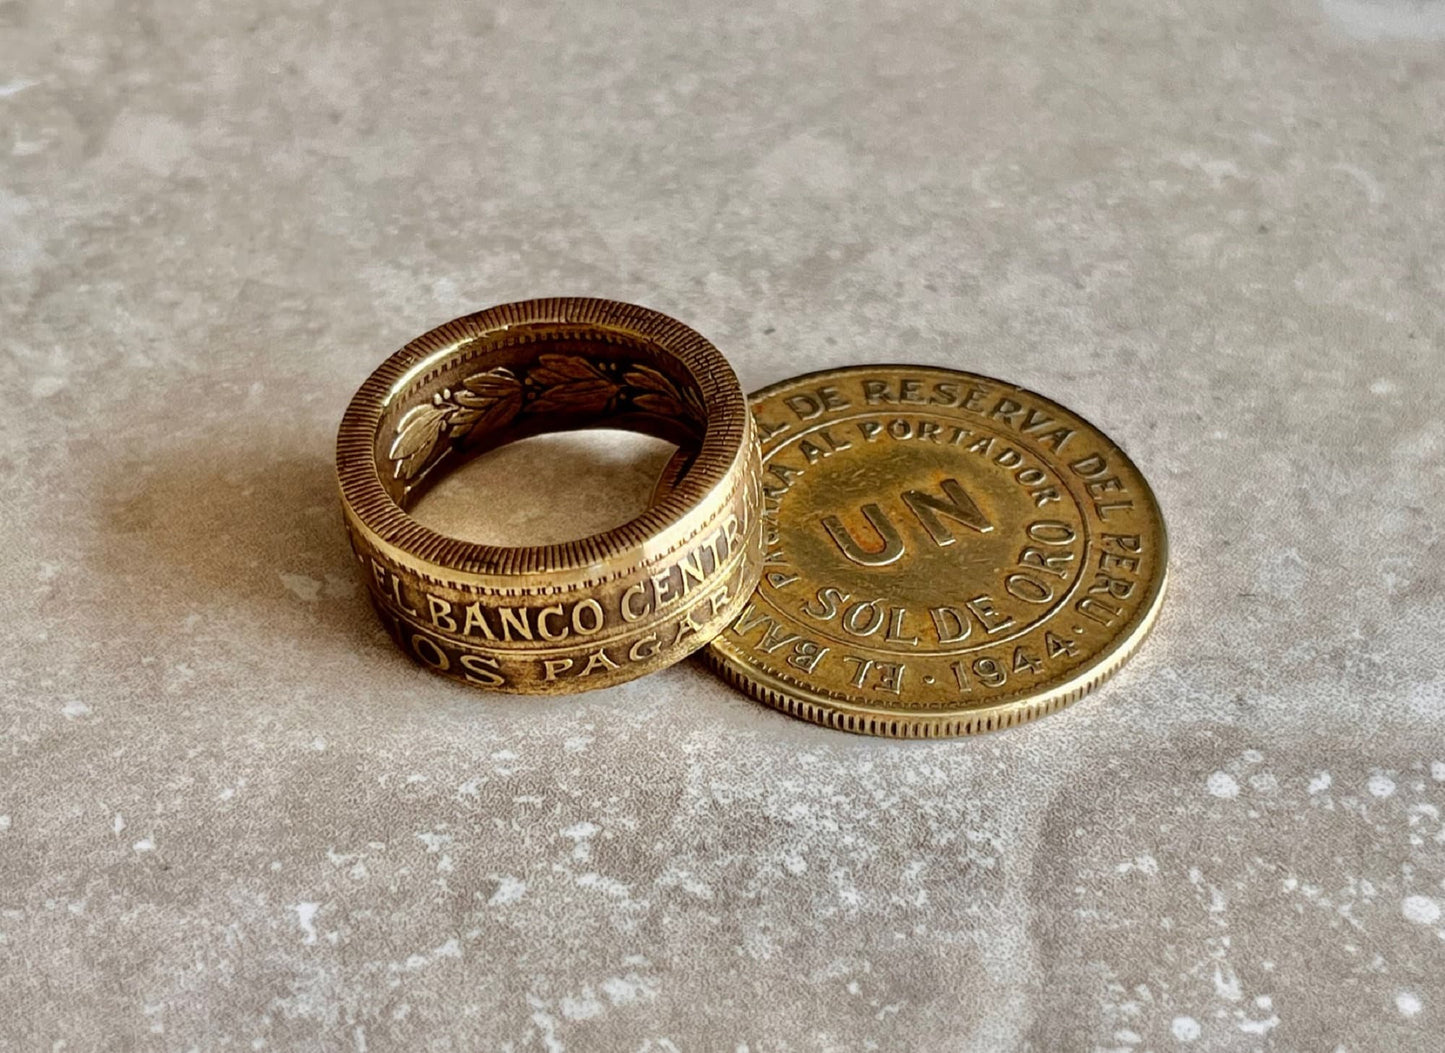 Peru Ring Coin Ring UN Peso Peruvian Handmade Personal Jewelry Ring Gift For Friend Coin Ring Gift For Him Her World Coin Collector